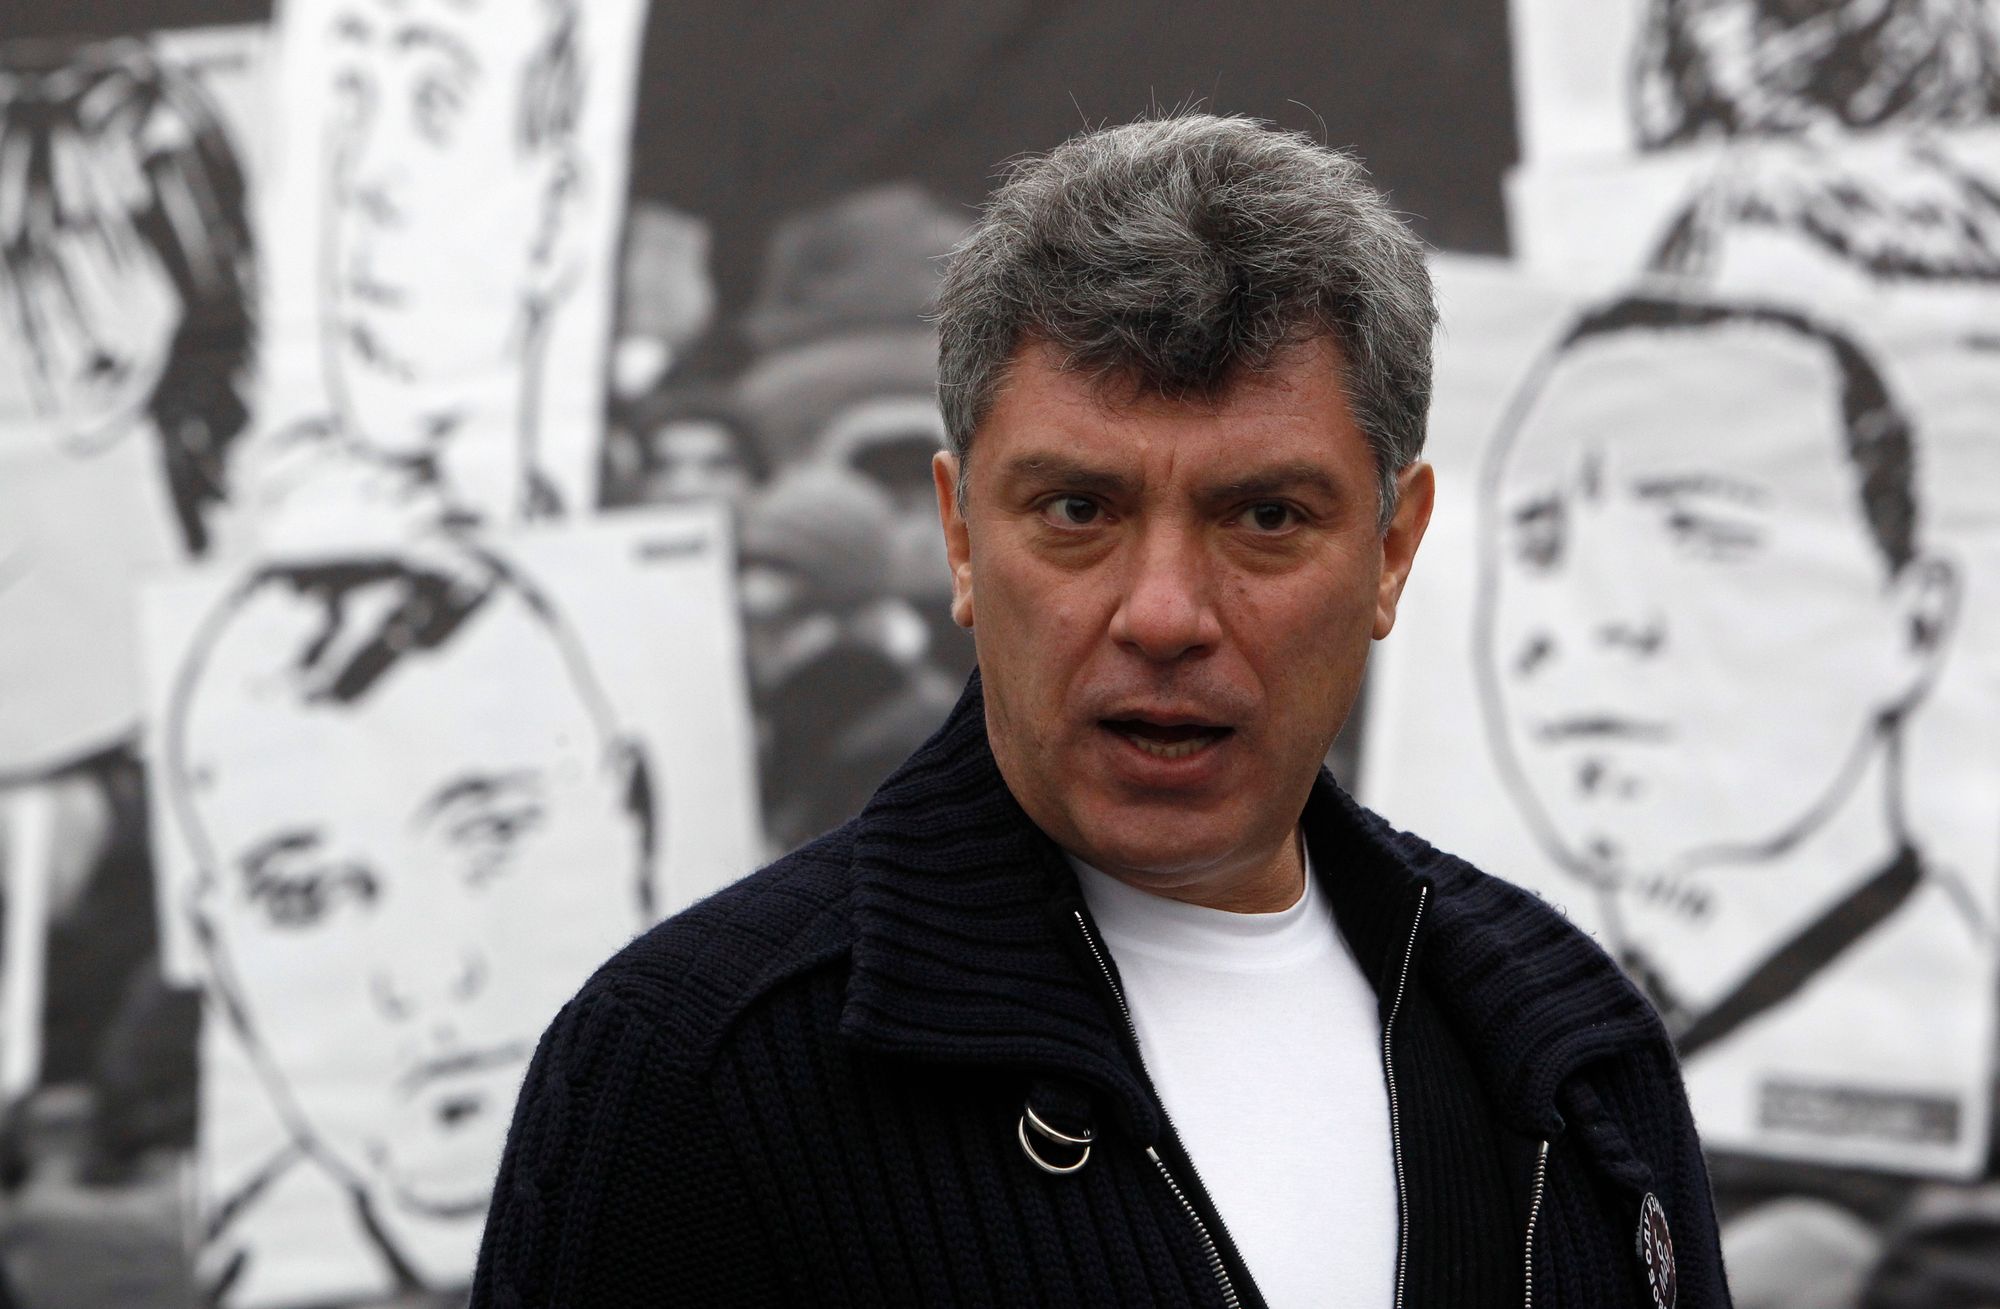 Opposition leader Boris Nemtsov attends a rally in central Moscow, April 6, 2013. Protesters demanded the release of anti-government activists detained at Moscow's Bolotnaya Square on May 6, 2012, the eve of Putin's inauguration. REUTERS/Sergei Karpukhin (RUSSIA - Tags: POLITICS CIVIL UNREST) - RTXYANV